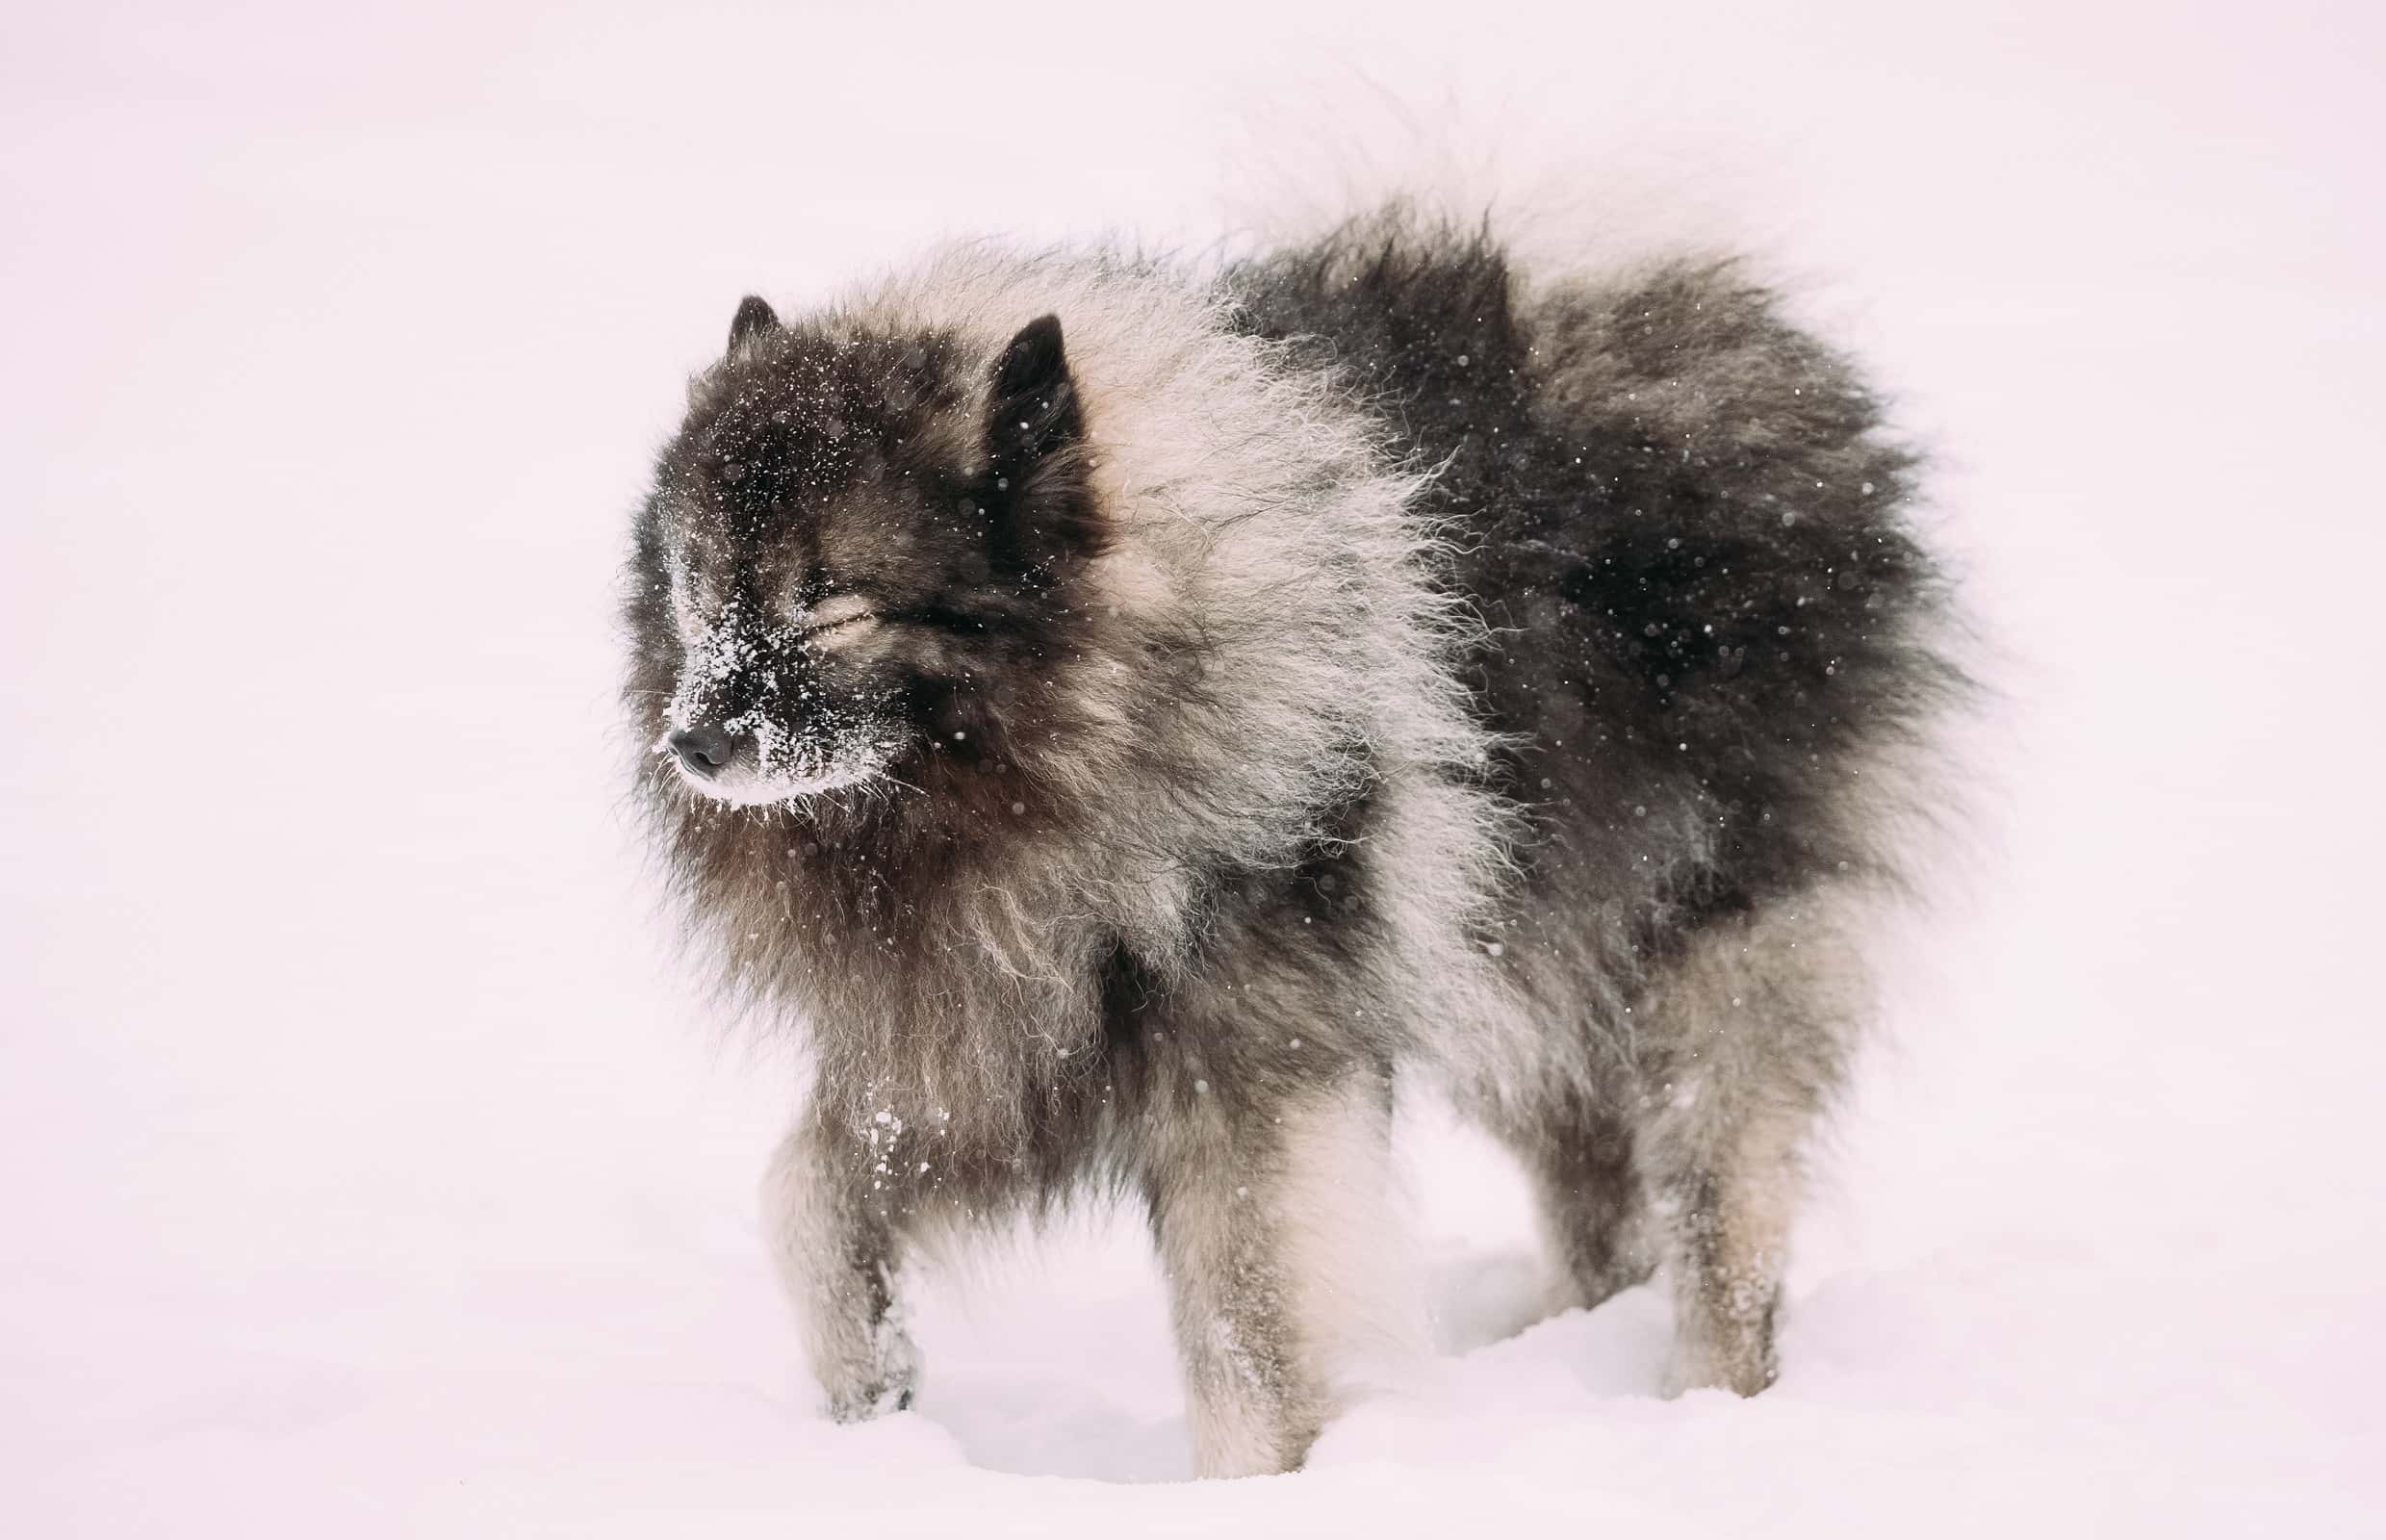 Keeshond Dog Play Outdoor In Snow. Winter Season. Dog Training Outdoors.